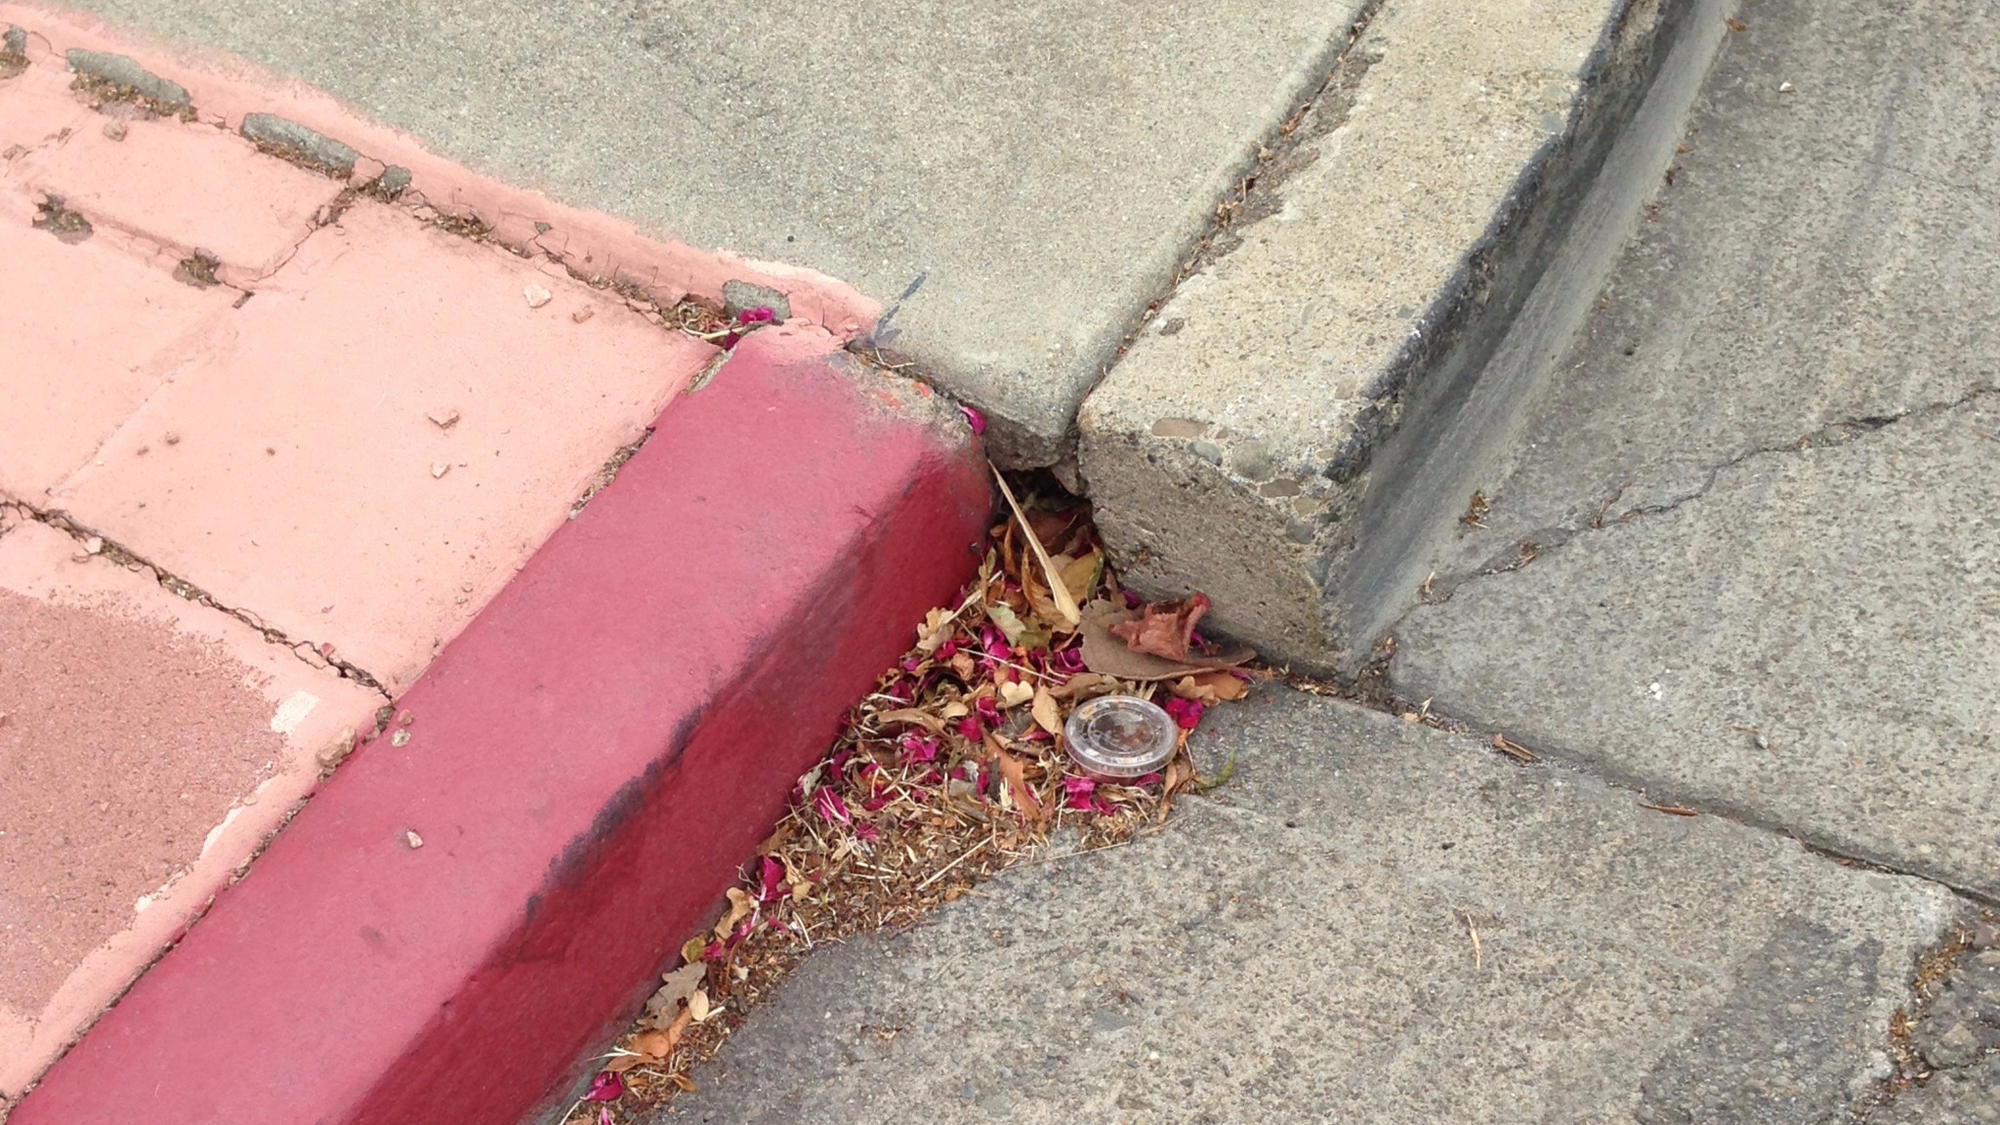 This curb was once flush but became offset because the Hayward fault is pulling the curb apart.